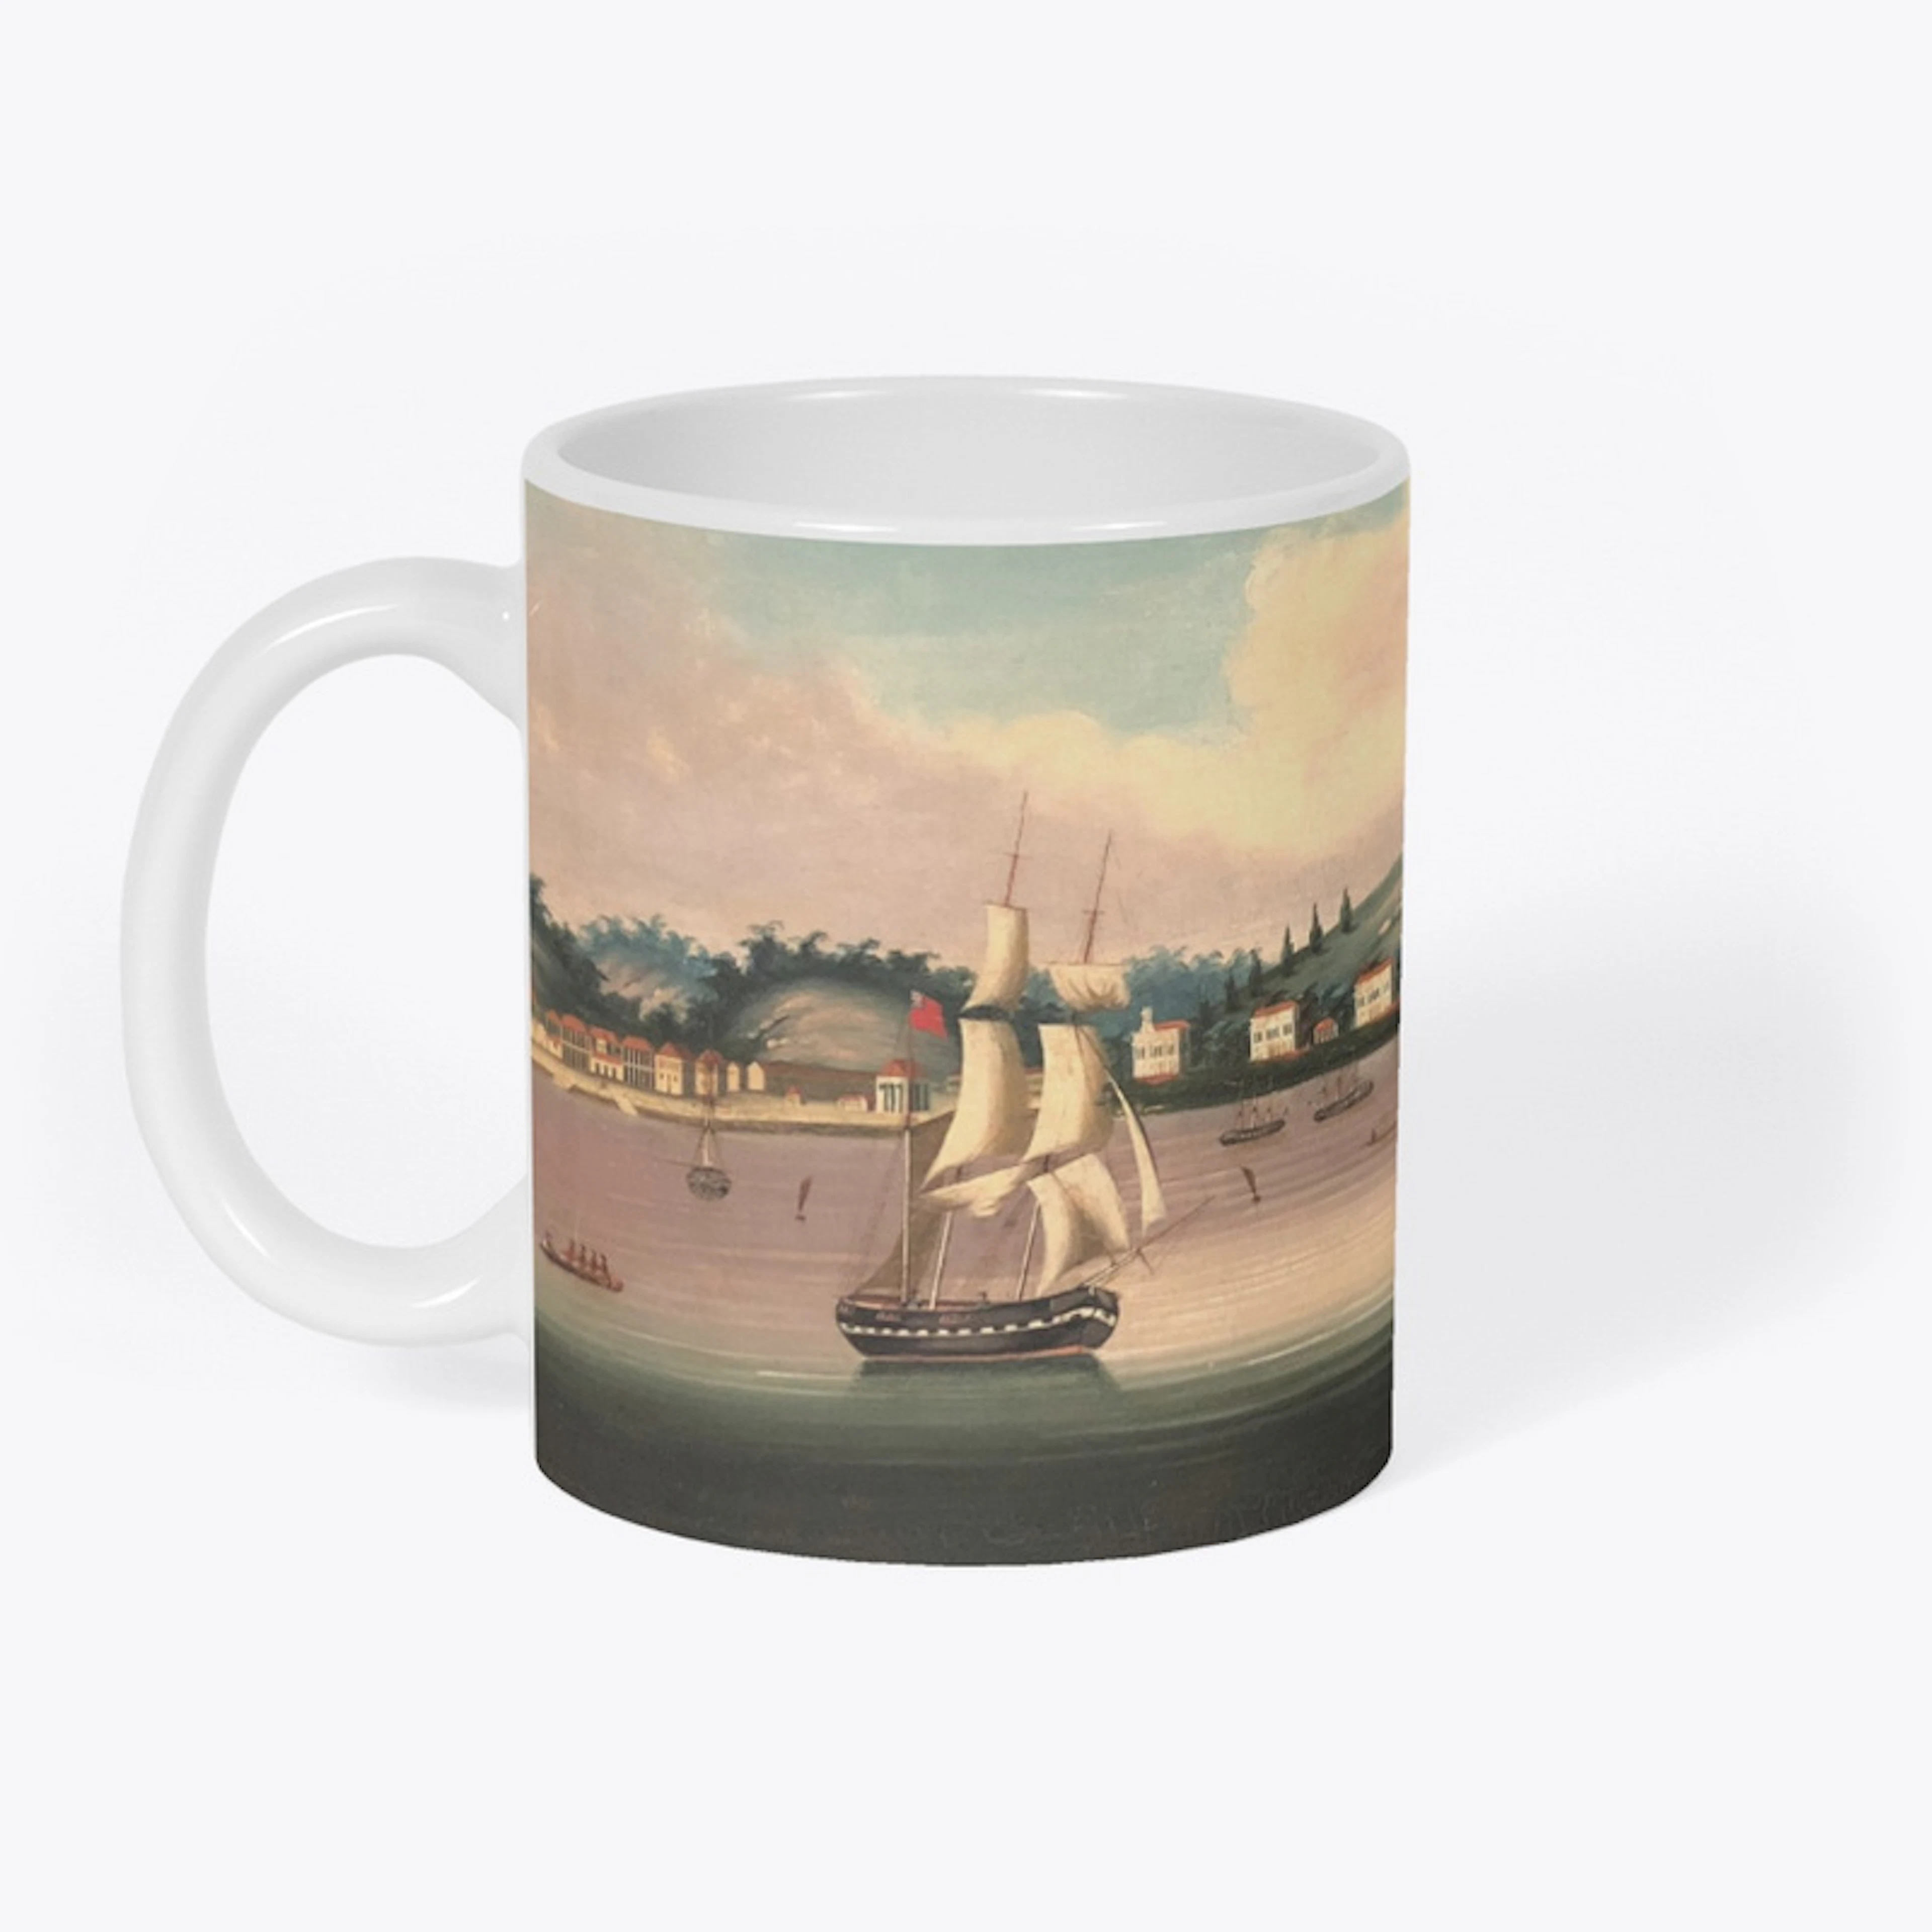 Mug - Landscape from the 19th century